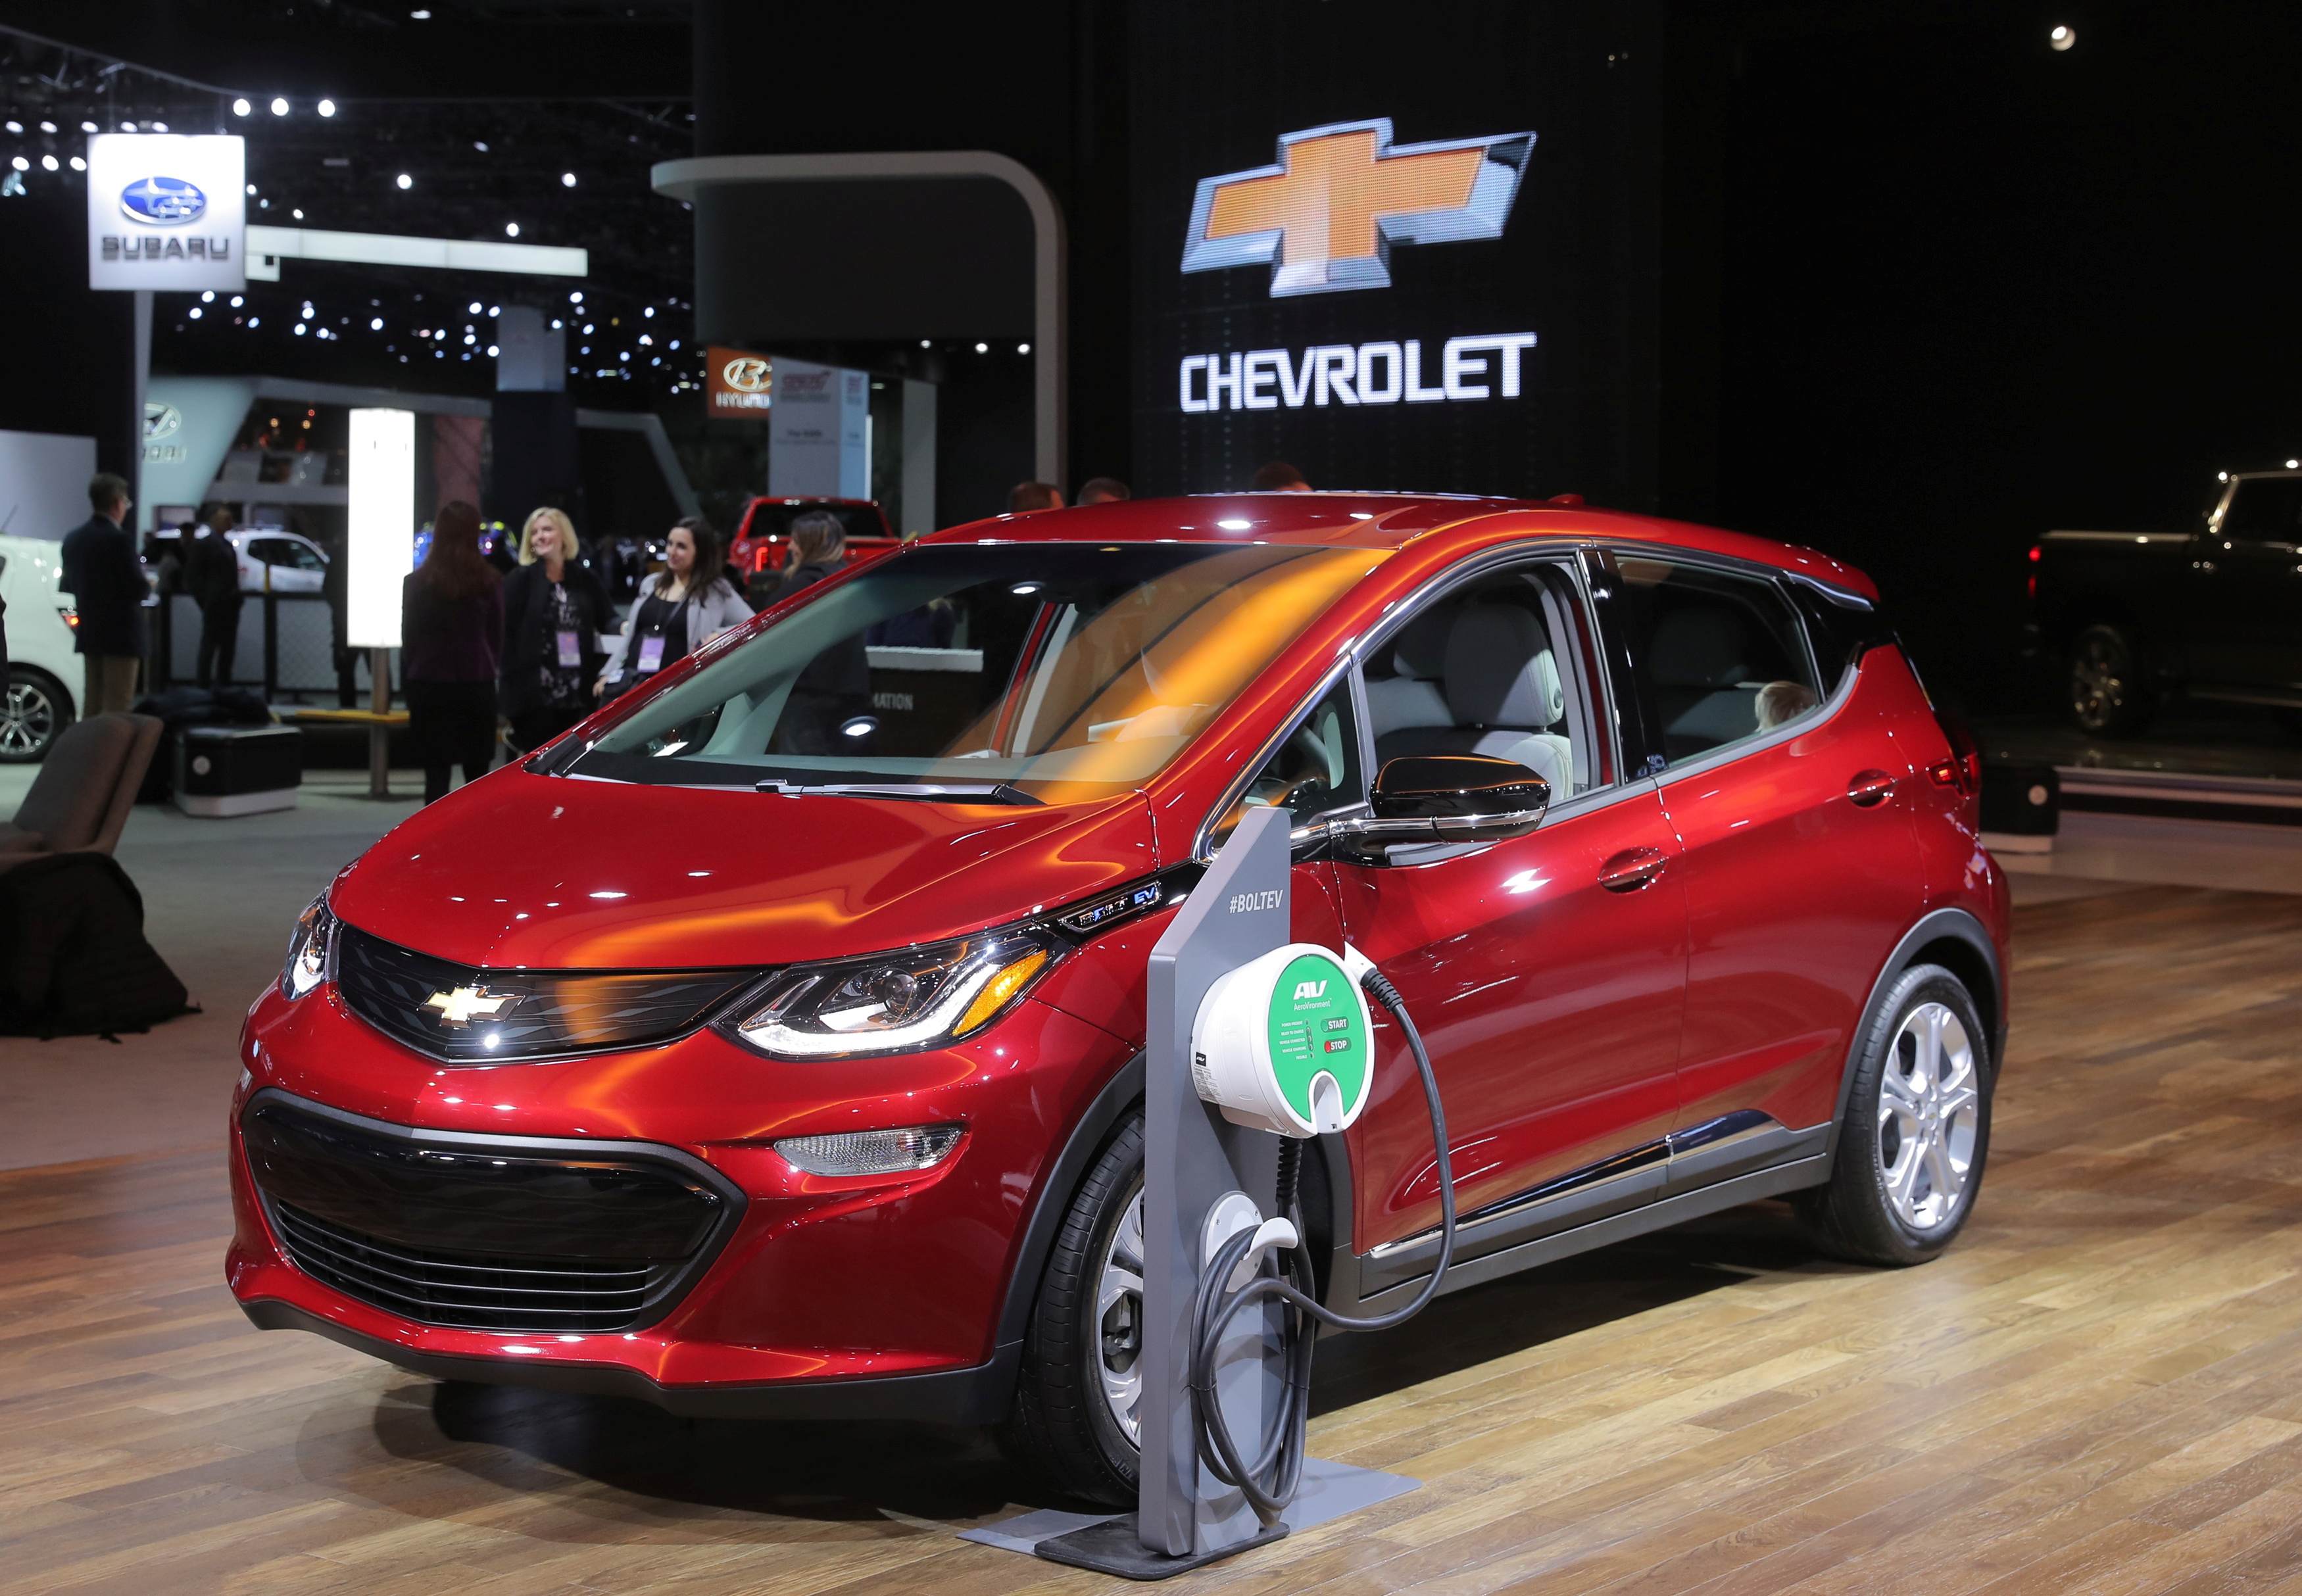 Chevrolet Bolt is displayed at the North American International Auto Show in Detroit, Michigan